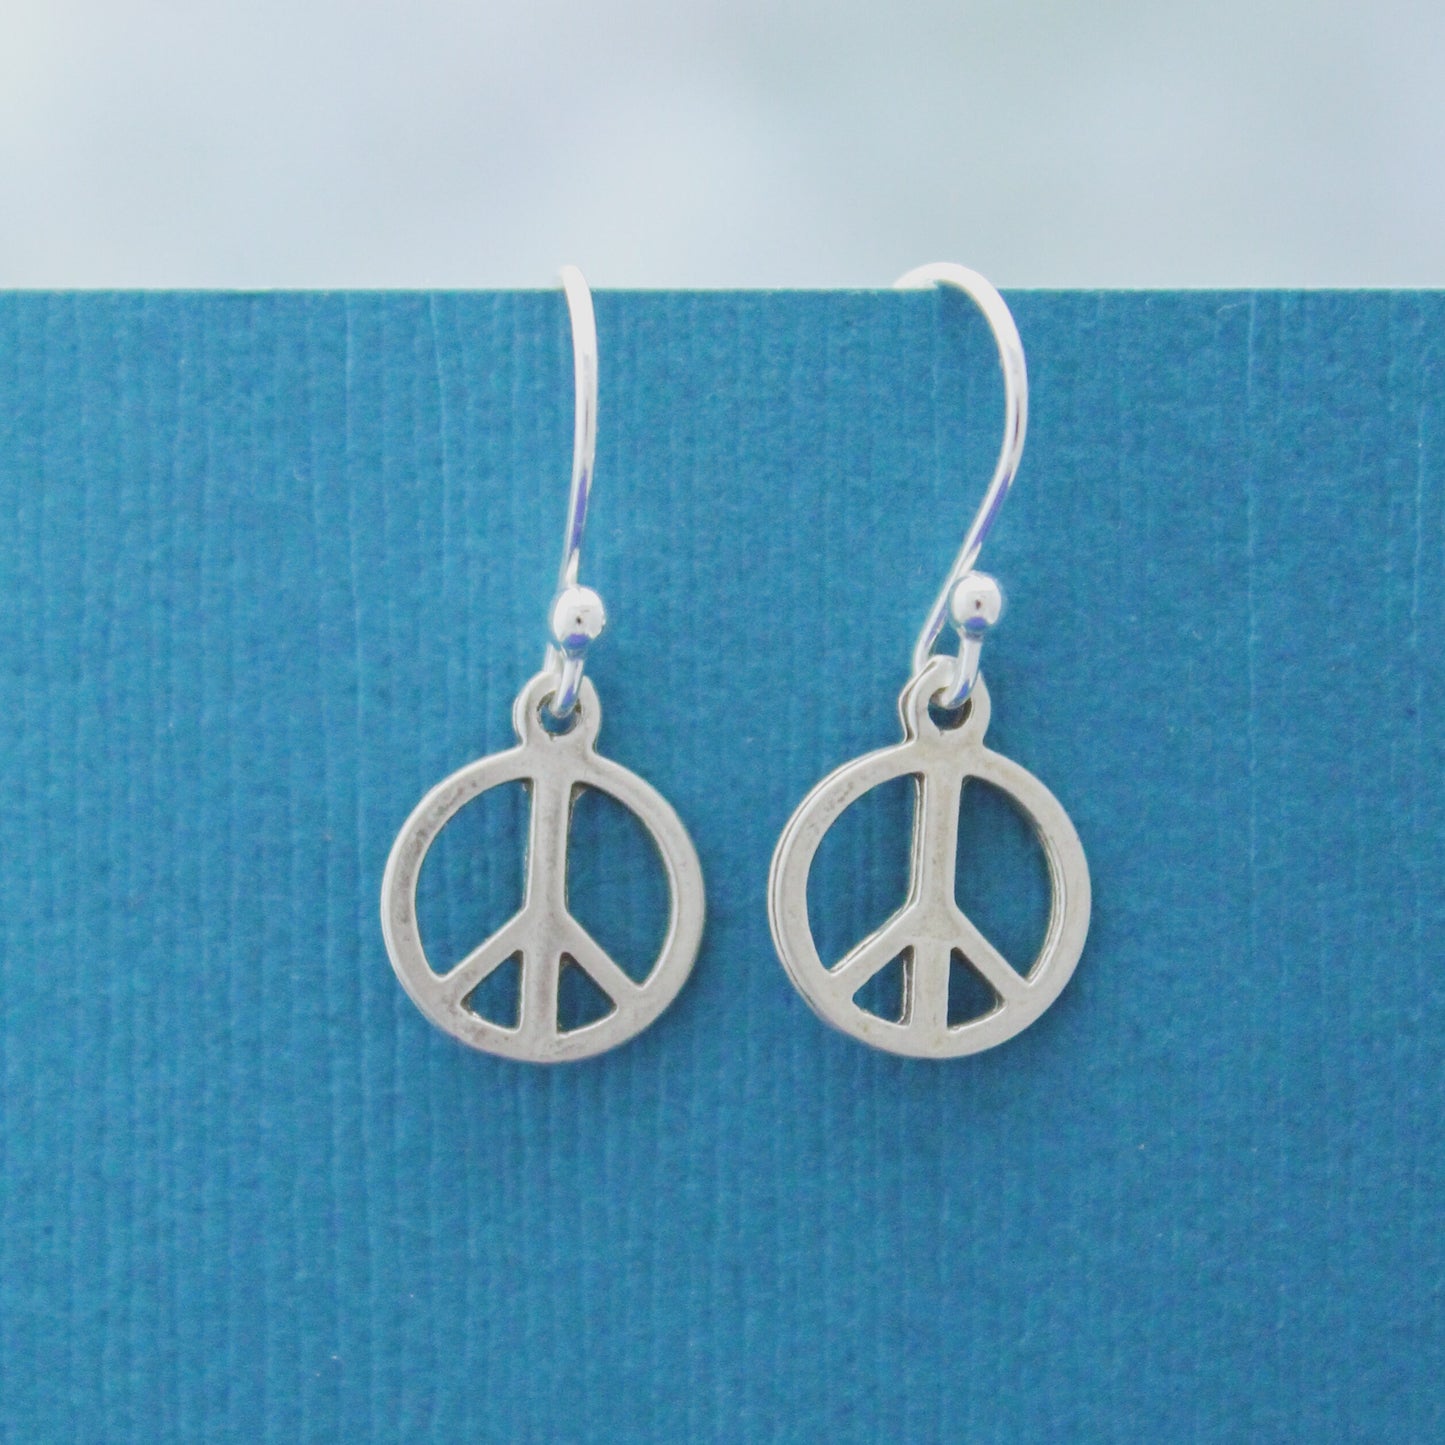 Cute Peace Sign Earrings, Sterling Silver Peace Earrings, Birthday Gift, Peace Sign Jewelry, Gifts for Her, Dainty Silver Earrings, Peace